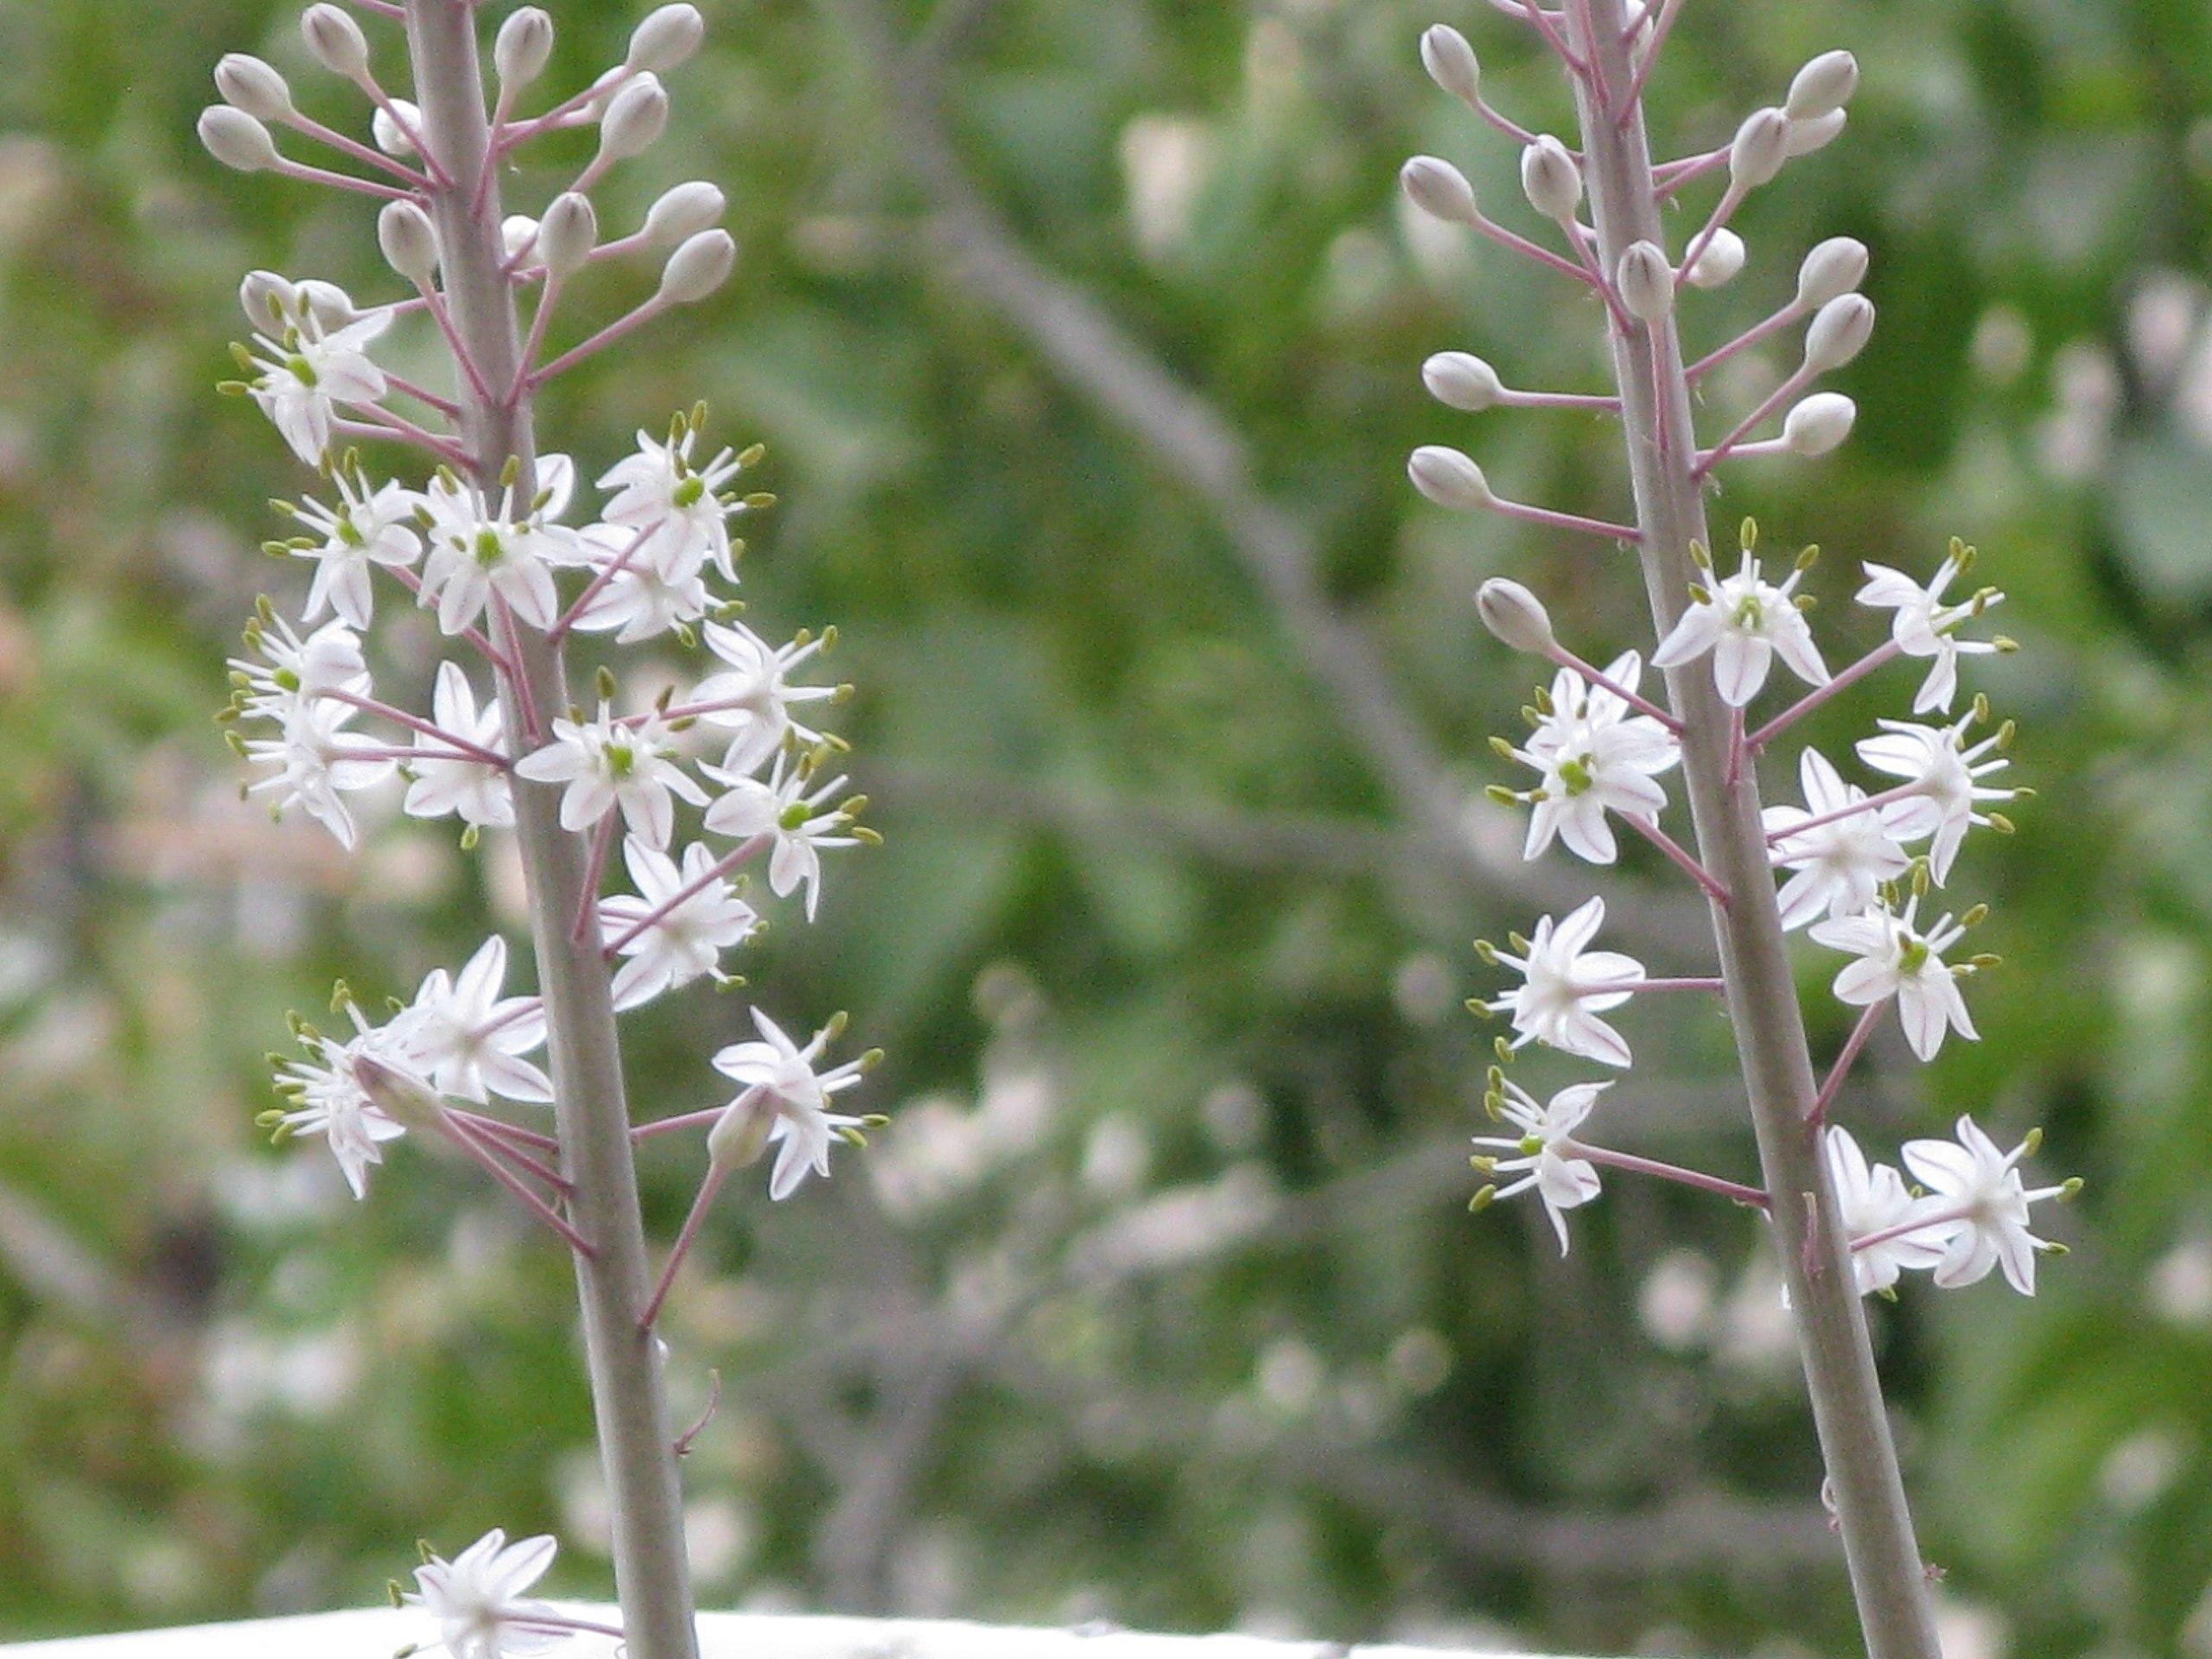 White flower with stigma, white style and filament, lime anthers and ovary. white-purple buds and petiole and light-gray stem